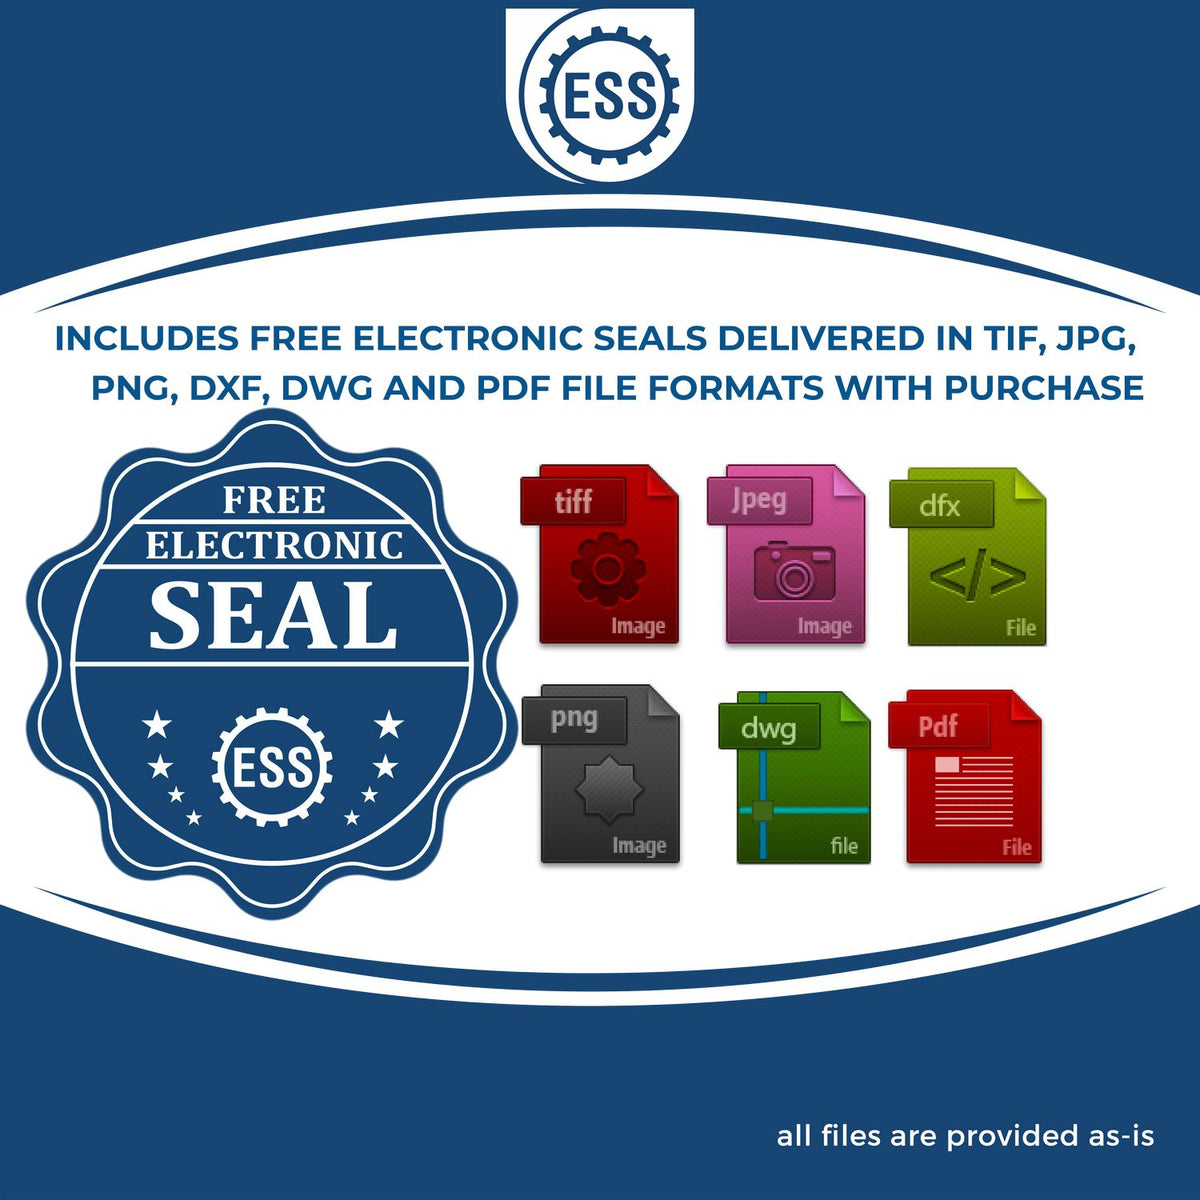 An infographic for the free electronic seal for the PSI Alabama Notary Stamp illustrating the different file type icons such as DXF, DWG, TIF, JPG and PNG.